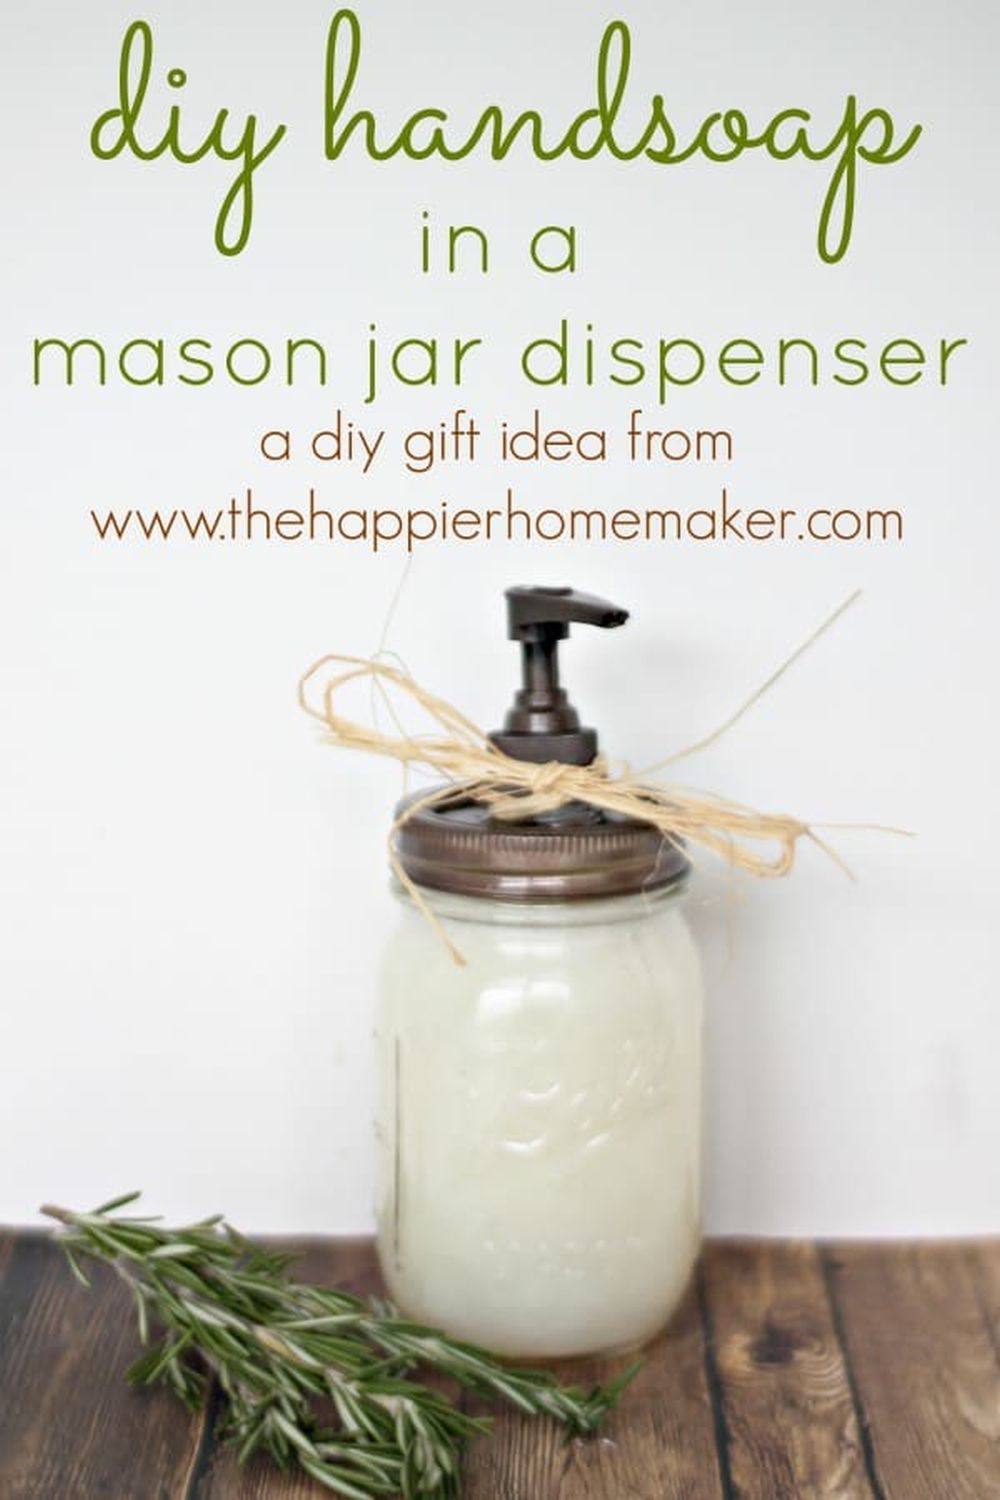 Homemade hand soap thoughtful gifts for wife